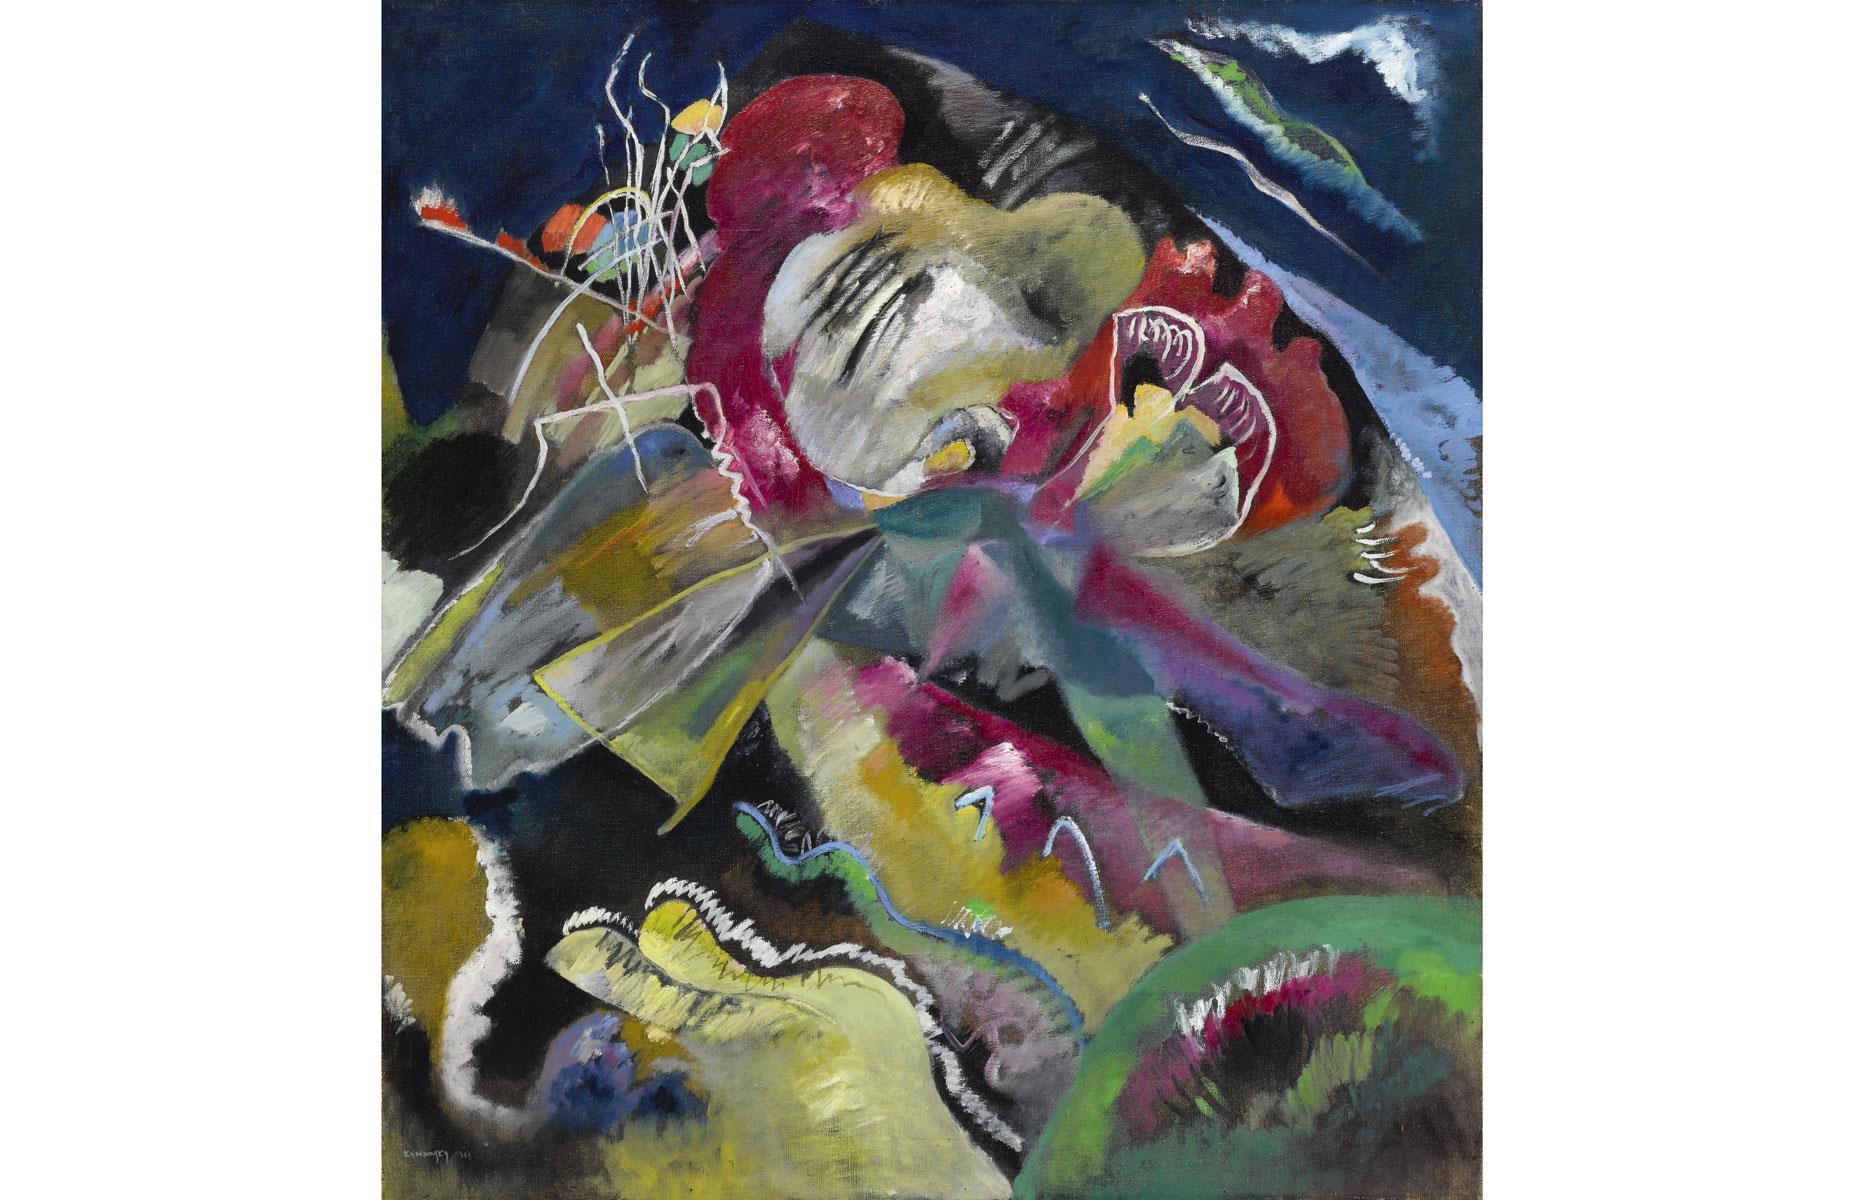 June: Kandinsky's 'Painting with White Lines' sells for a record $43 million (£33m)